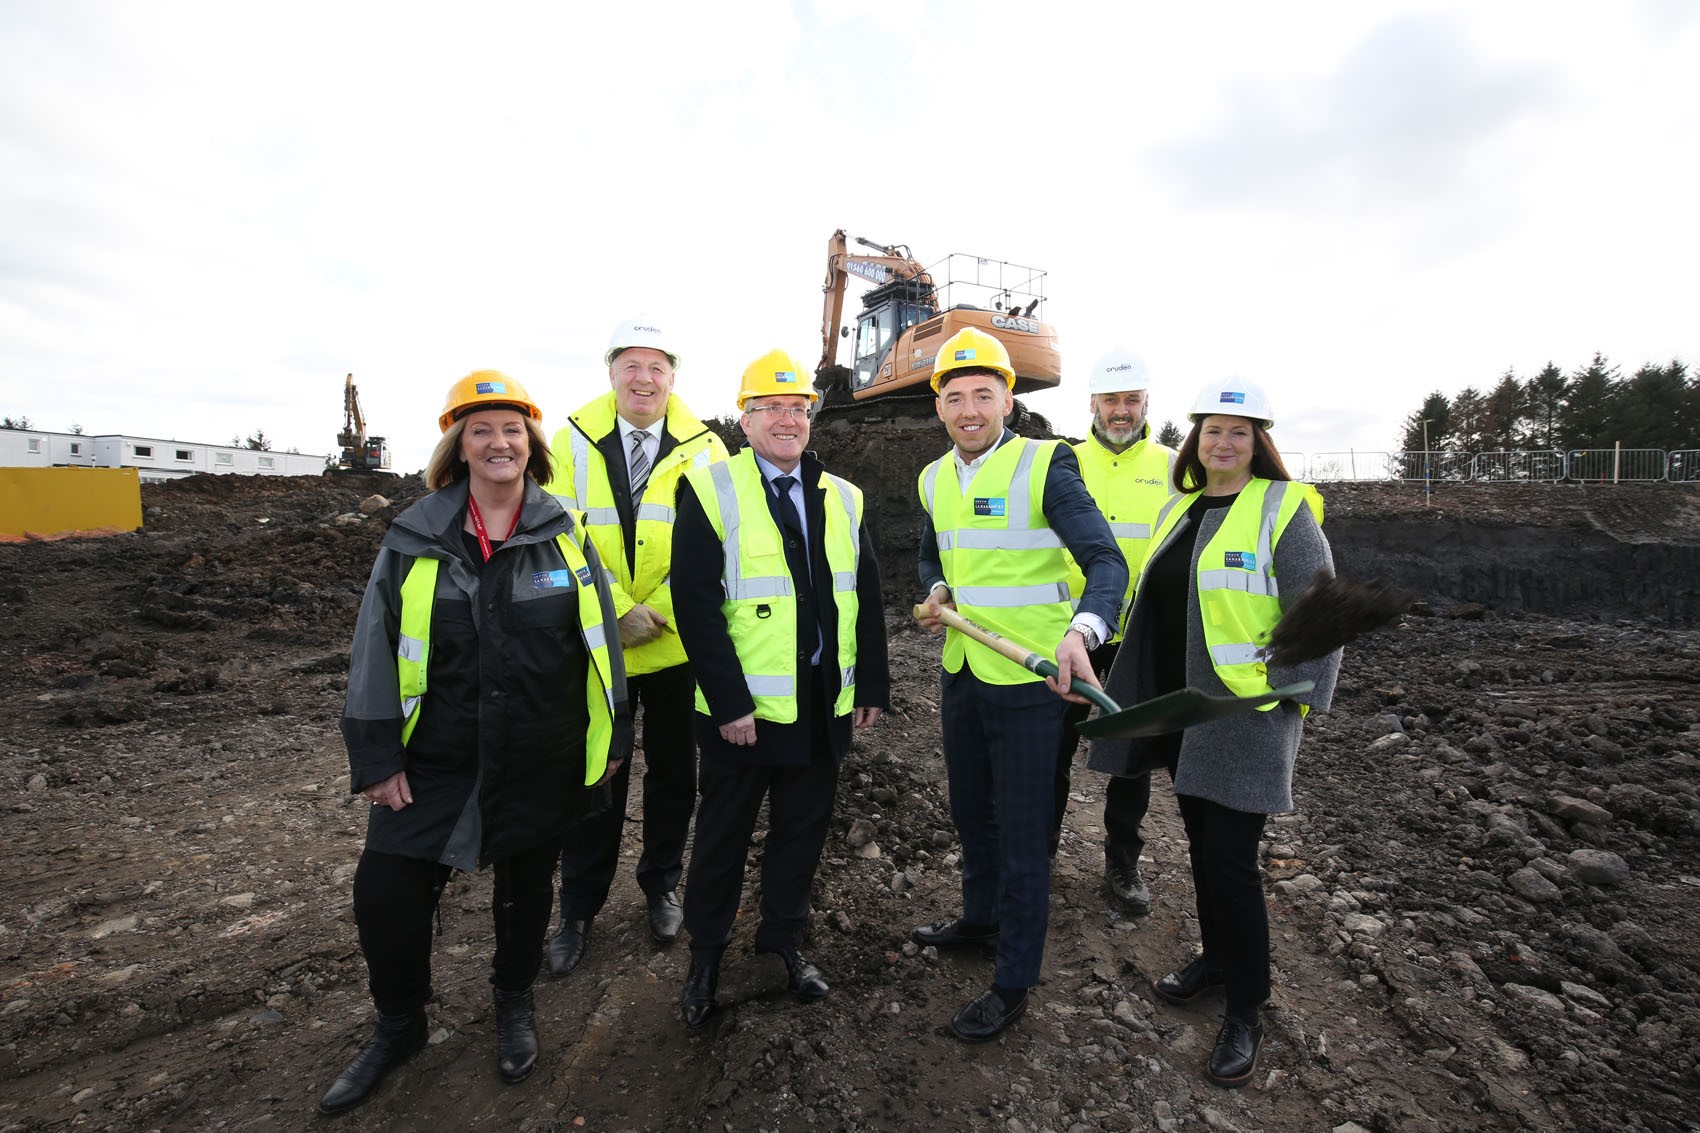 Work begins on new council homes in East Kilbride